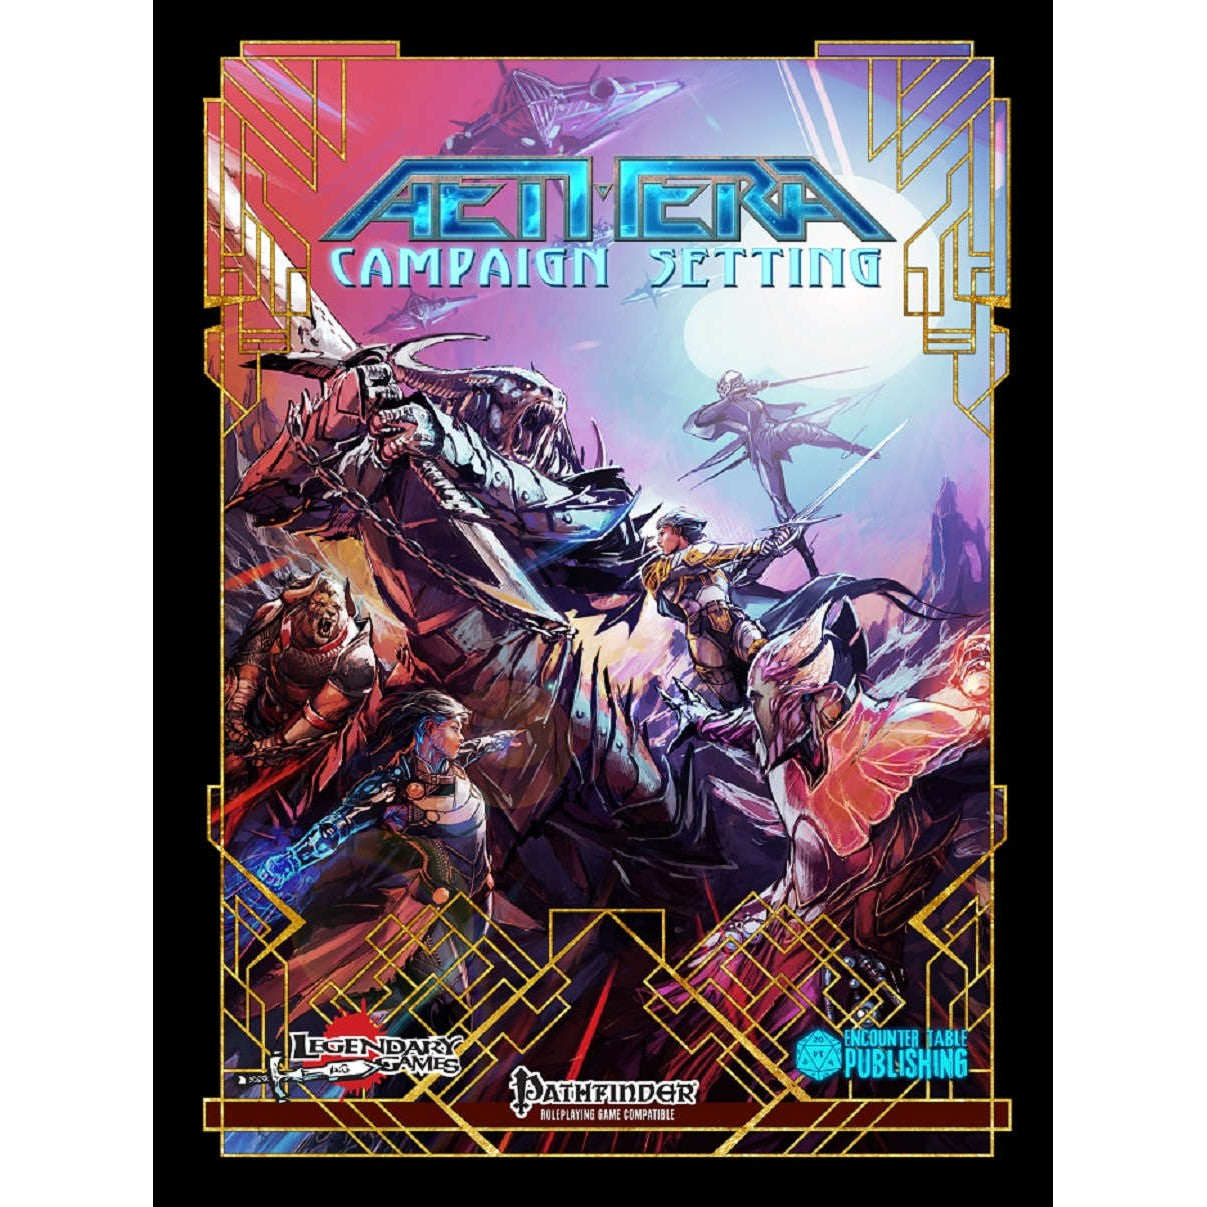 Cover Art of Aethera Campaign Setting